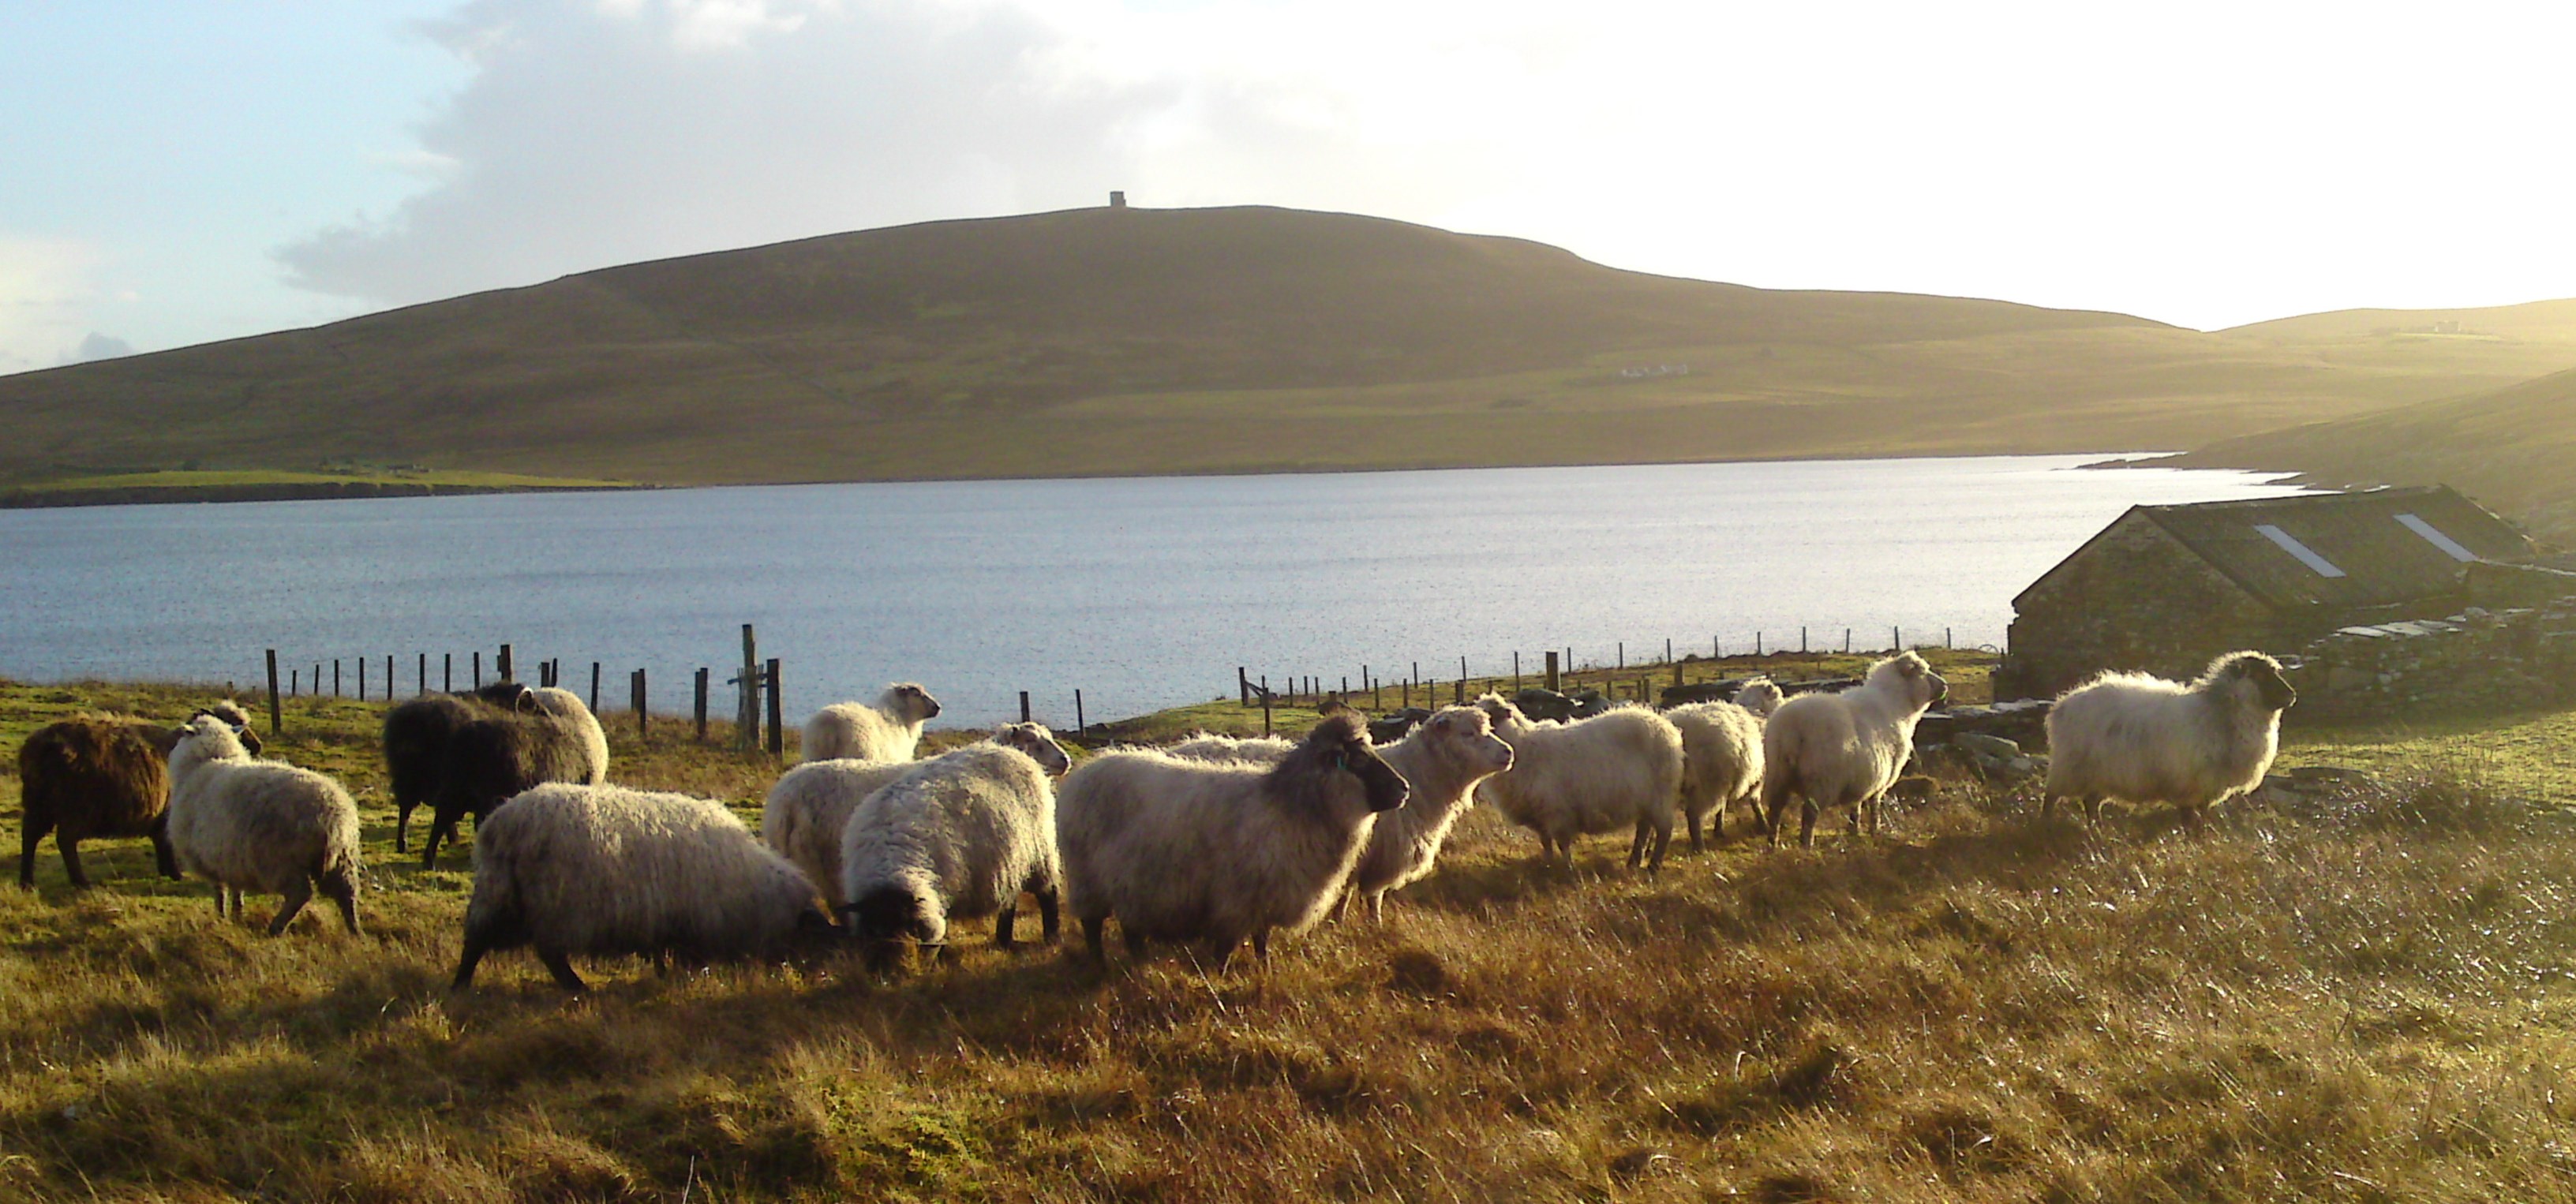 Chris's flock with Ander Hill in the background